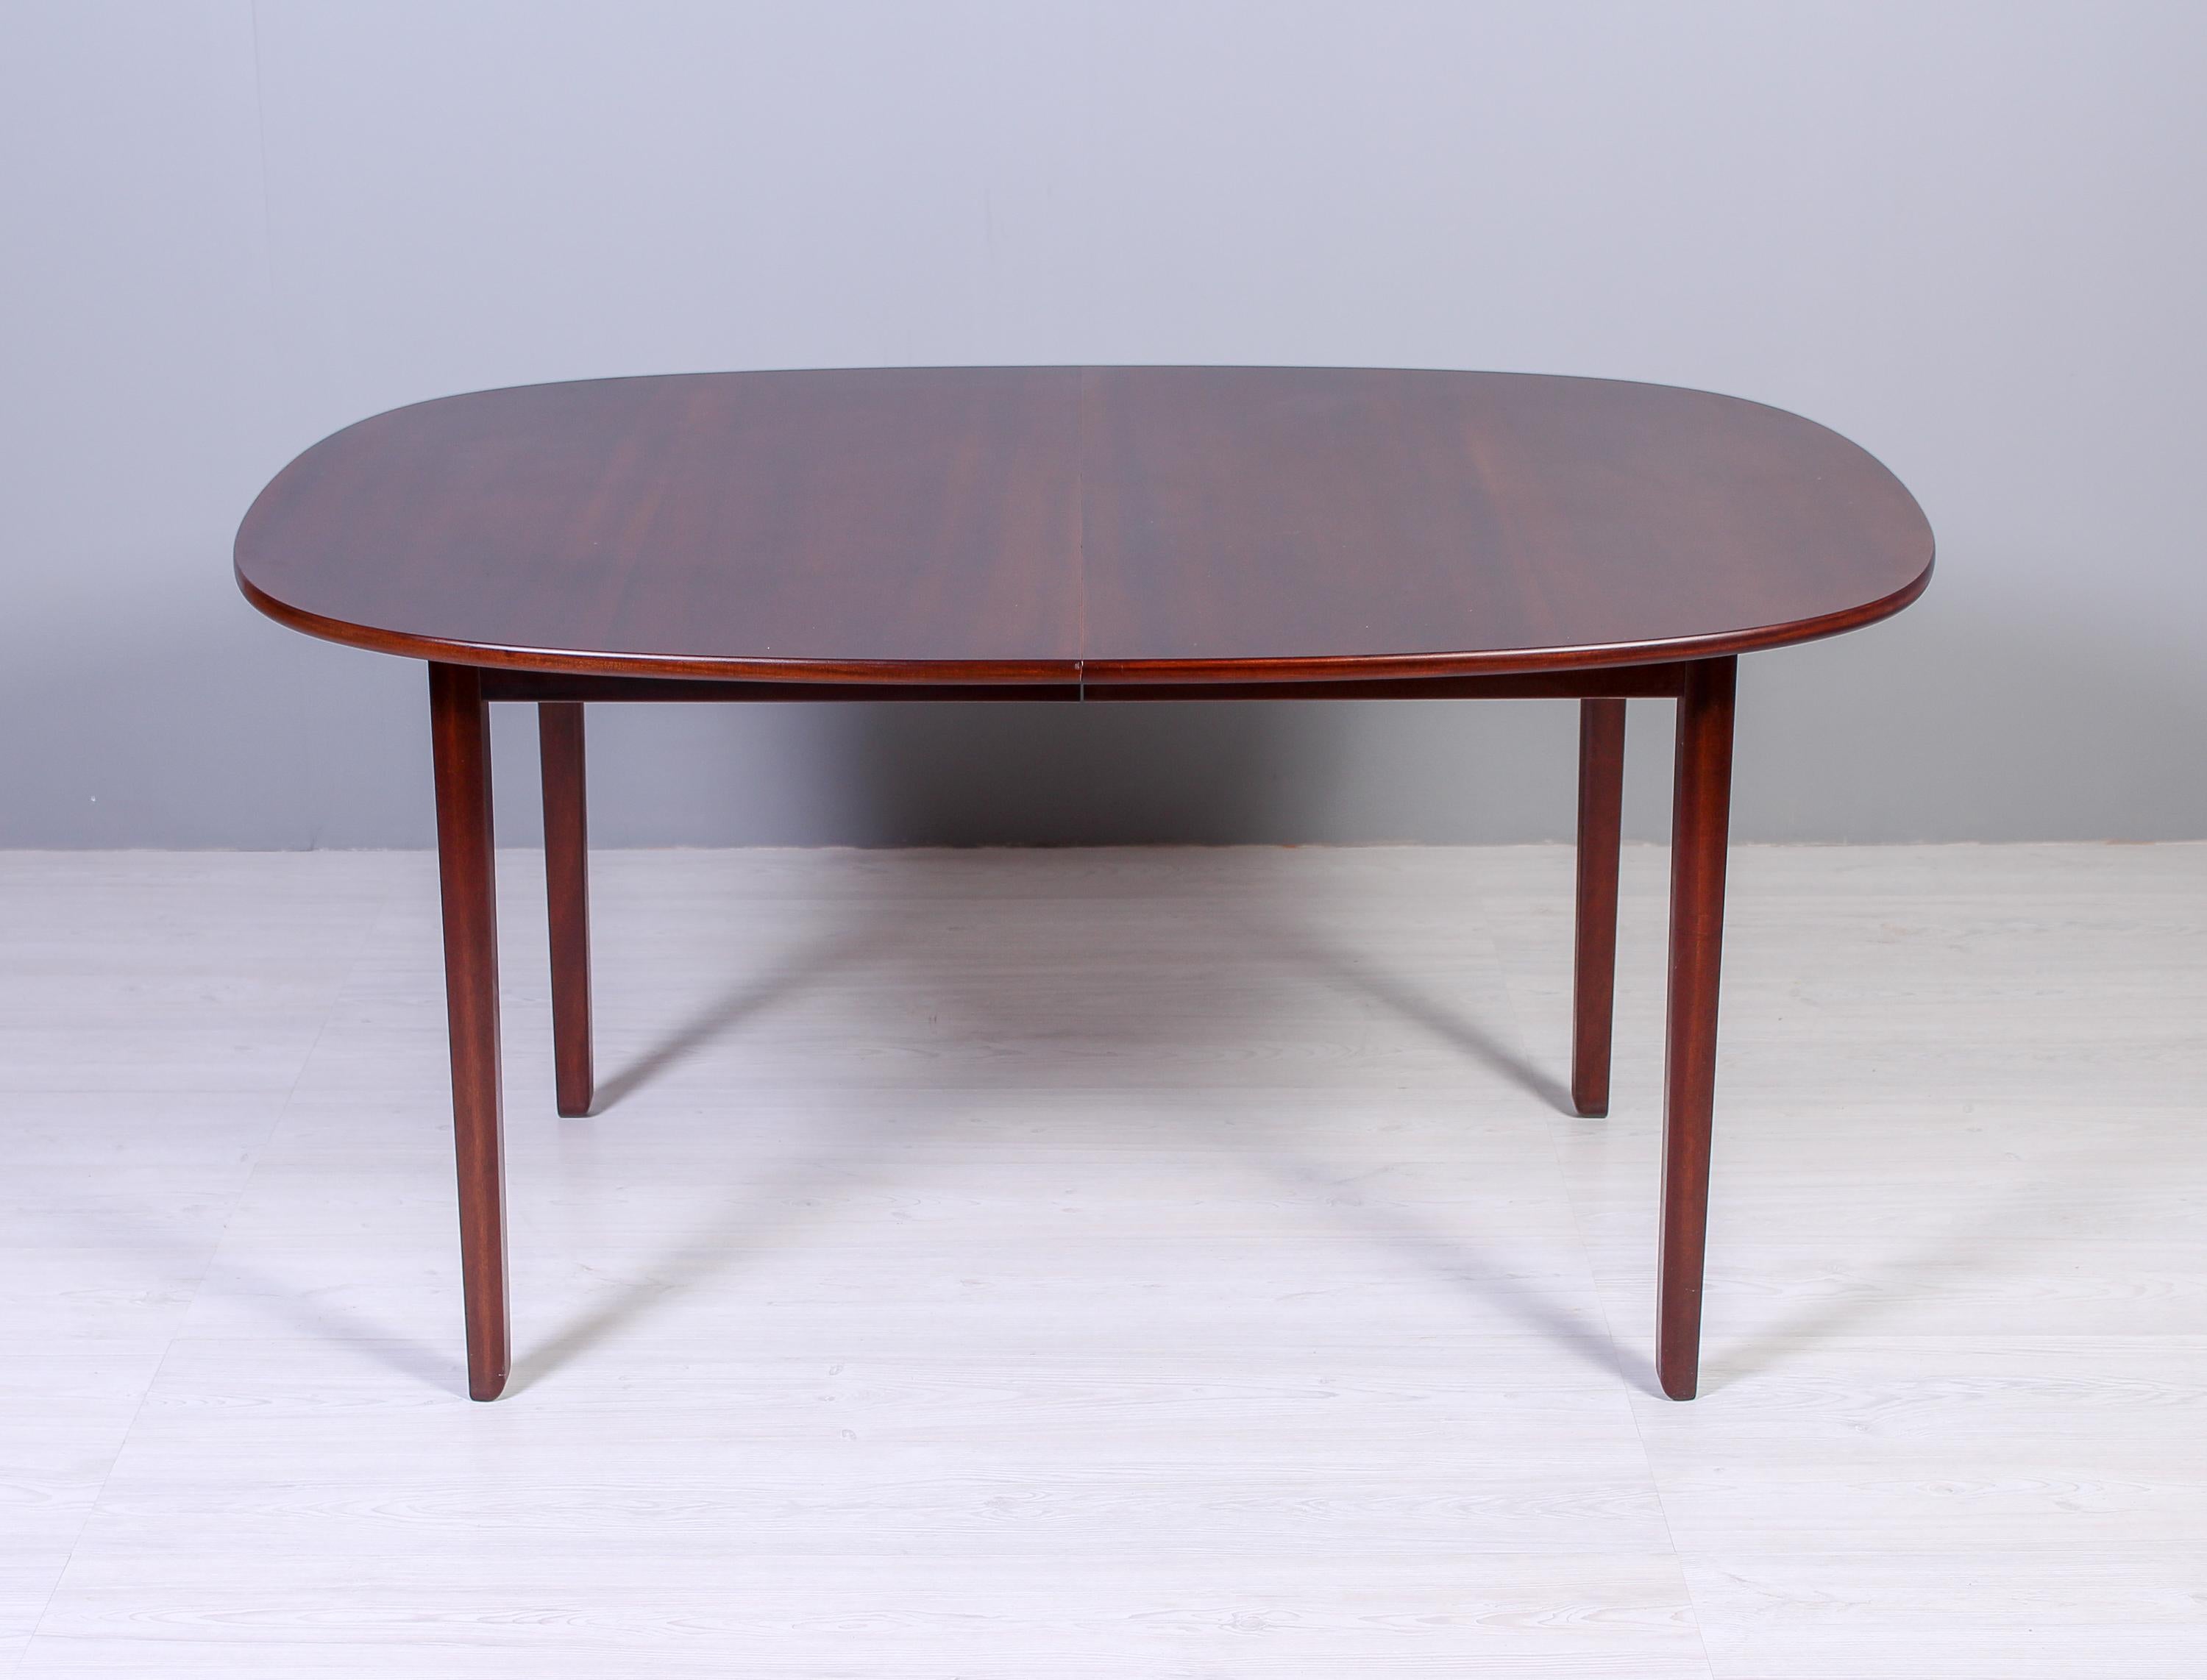 A oval dining table in high quality mahogany by Danish designer Ole Wanscher. This dining table is a part of a line of furniture by Wanscher called Rungstedlund and was designed in the 1960s. Produced by Paul Jeppesen. The table has two extra leaves